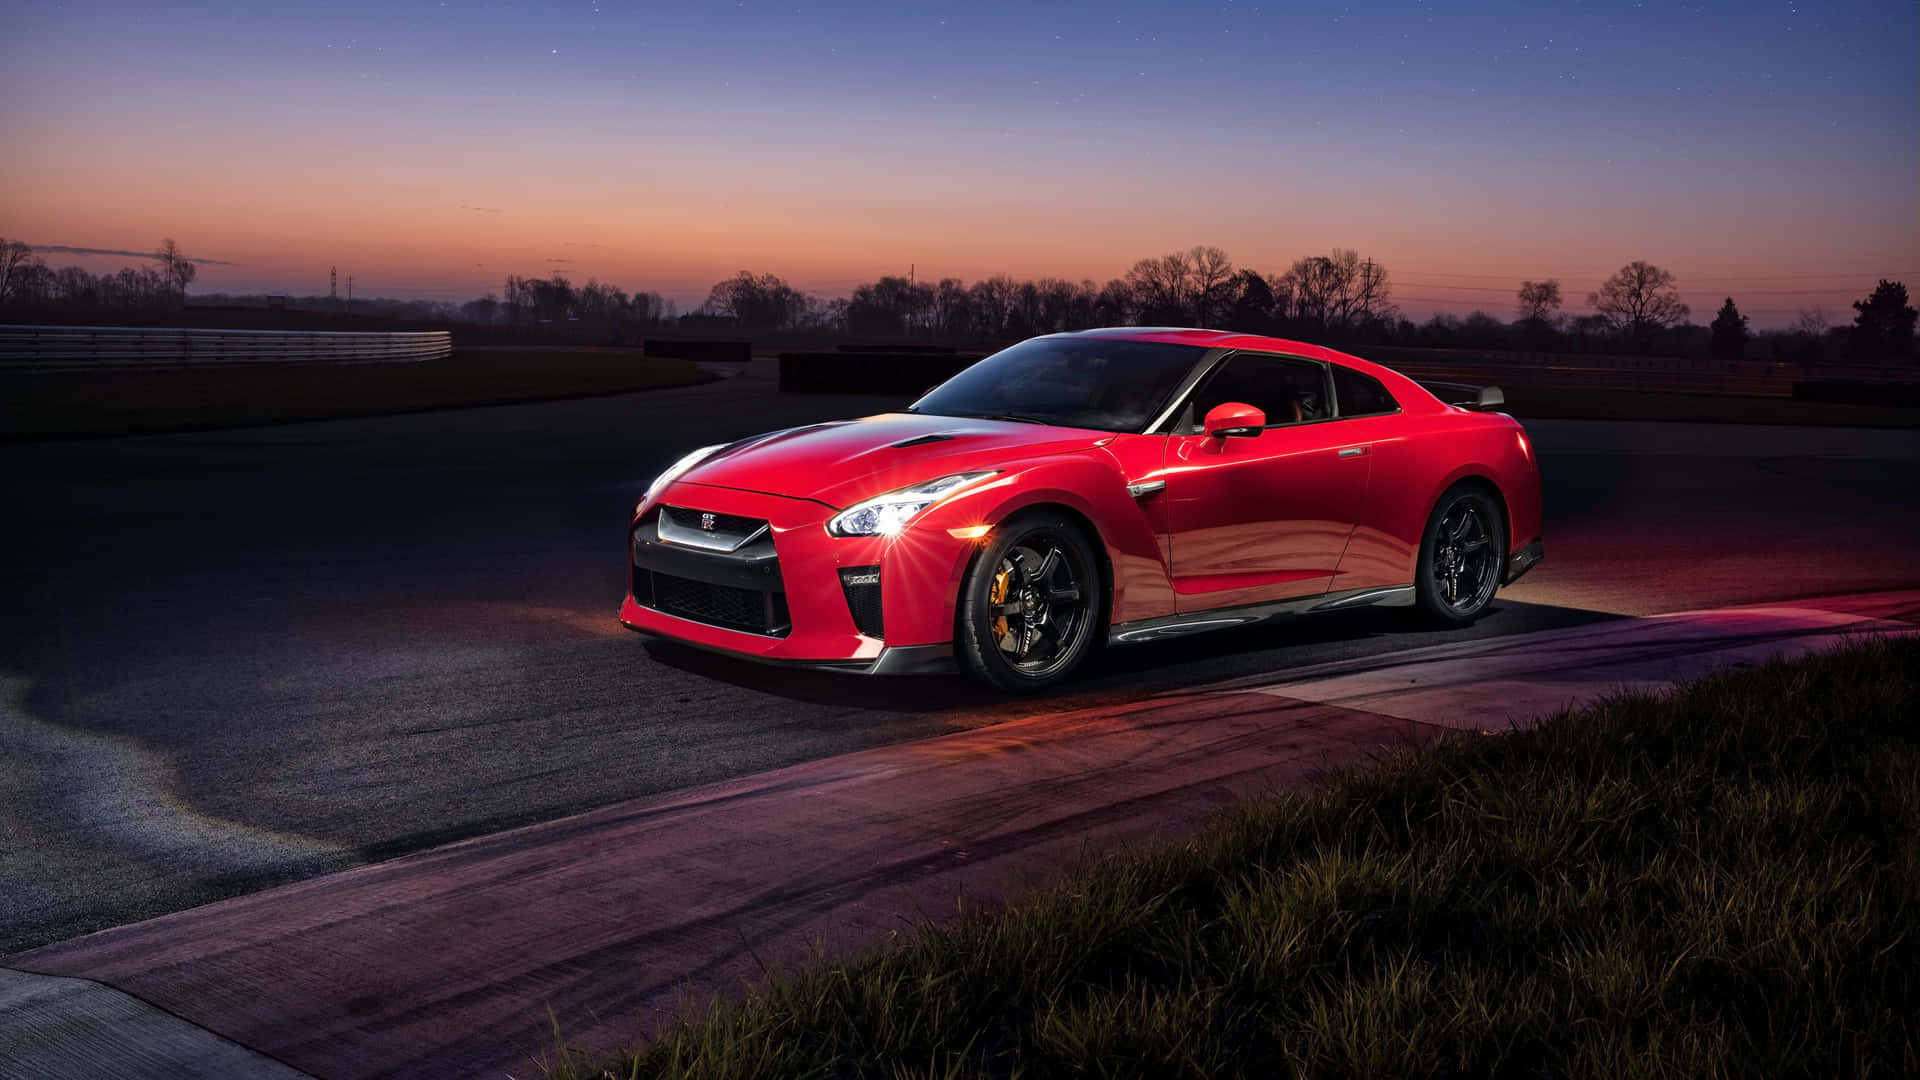 A Glance At The Gt-r, Nissan’s Professional Grade Sports Car Wallpaper